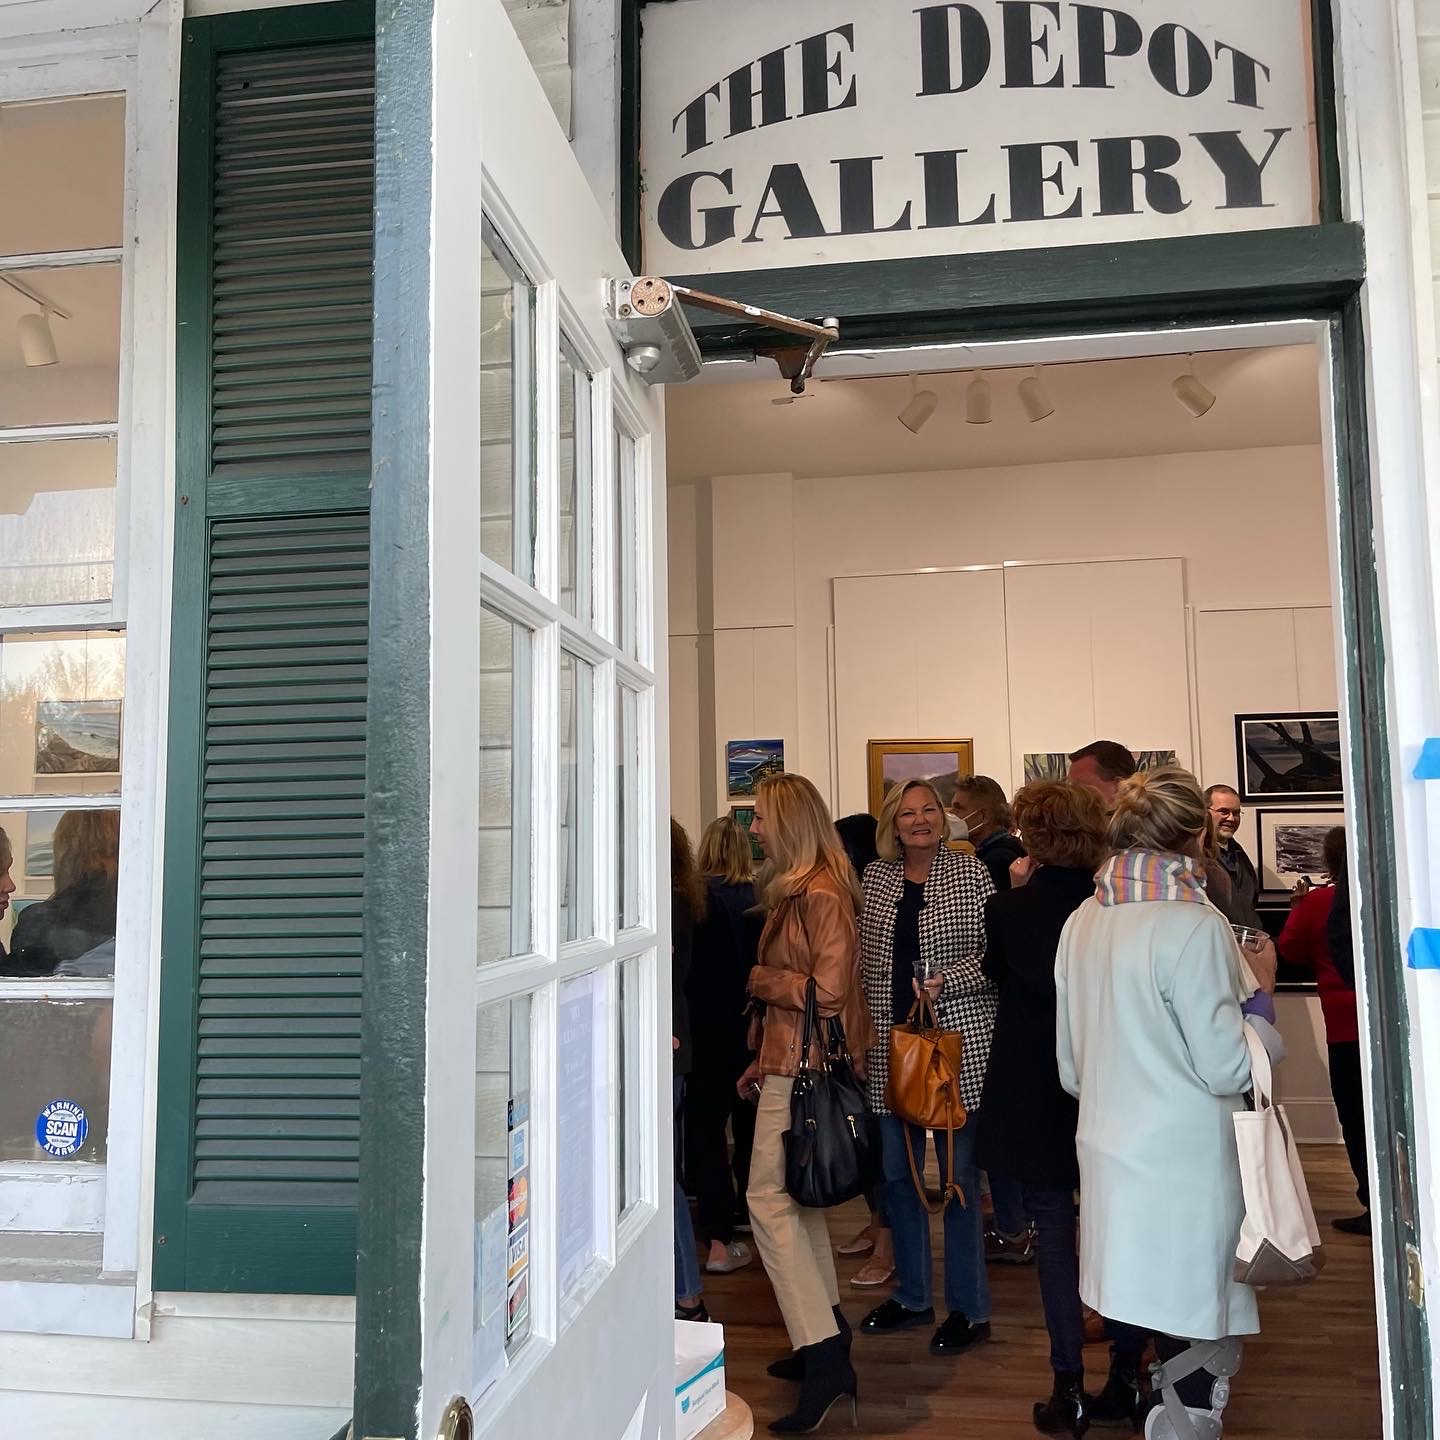 The Depot Gallery during a busy opening reception